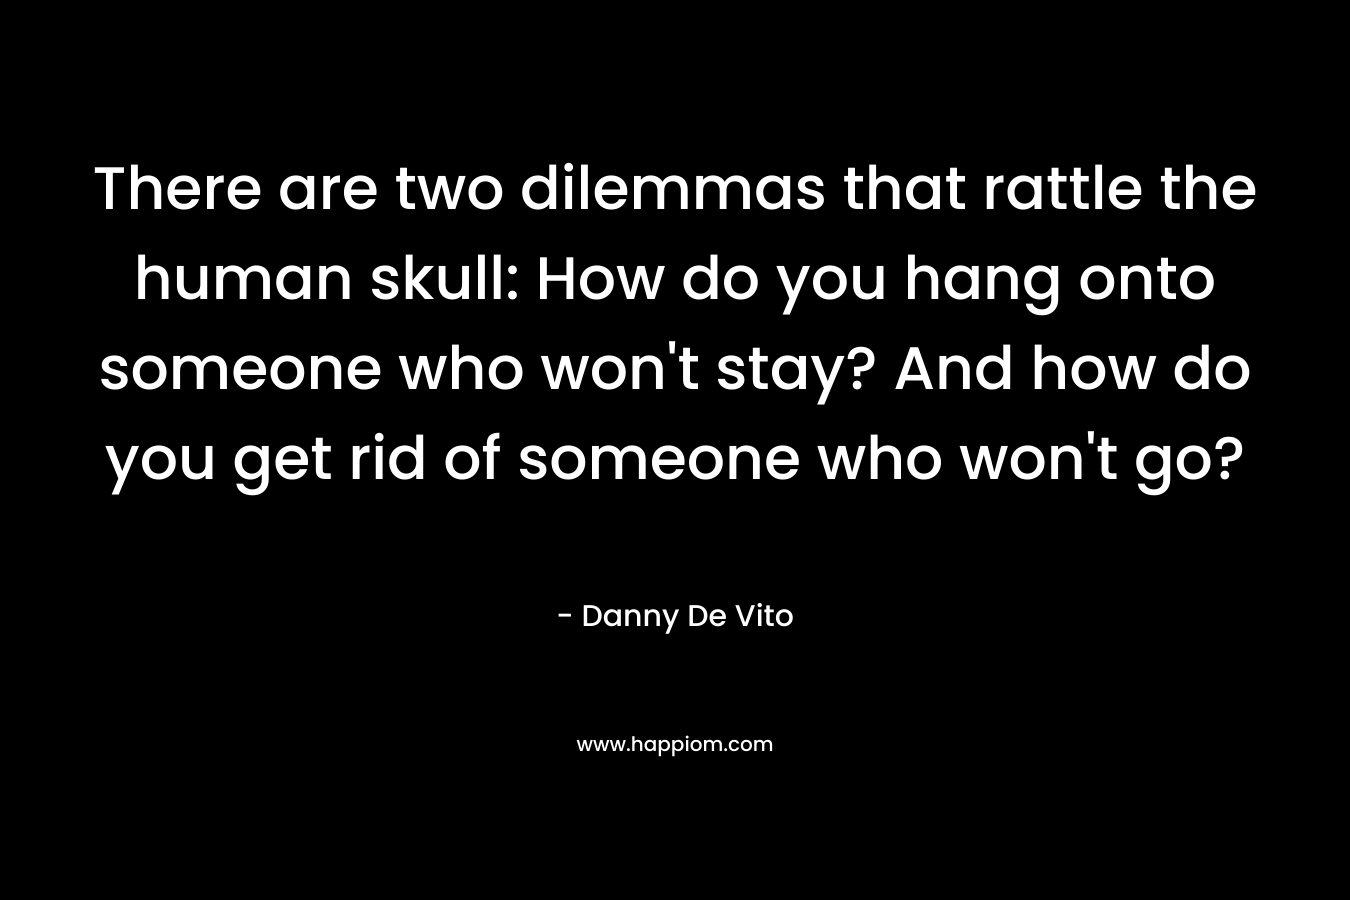 There are two dilemmas that rattle the human skull: How do you hang onto someone who won't stay? And how do you get rid of someone who won't go?